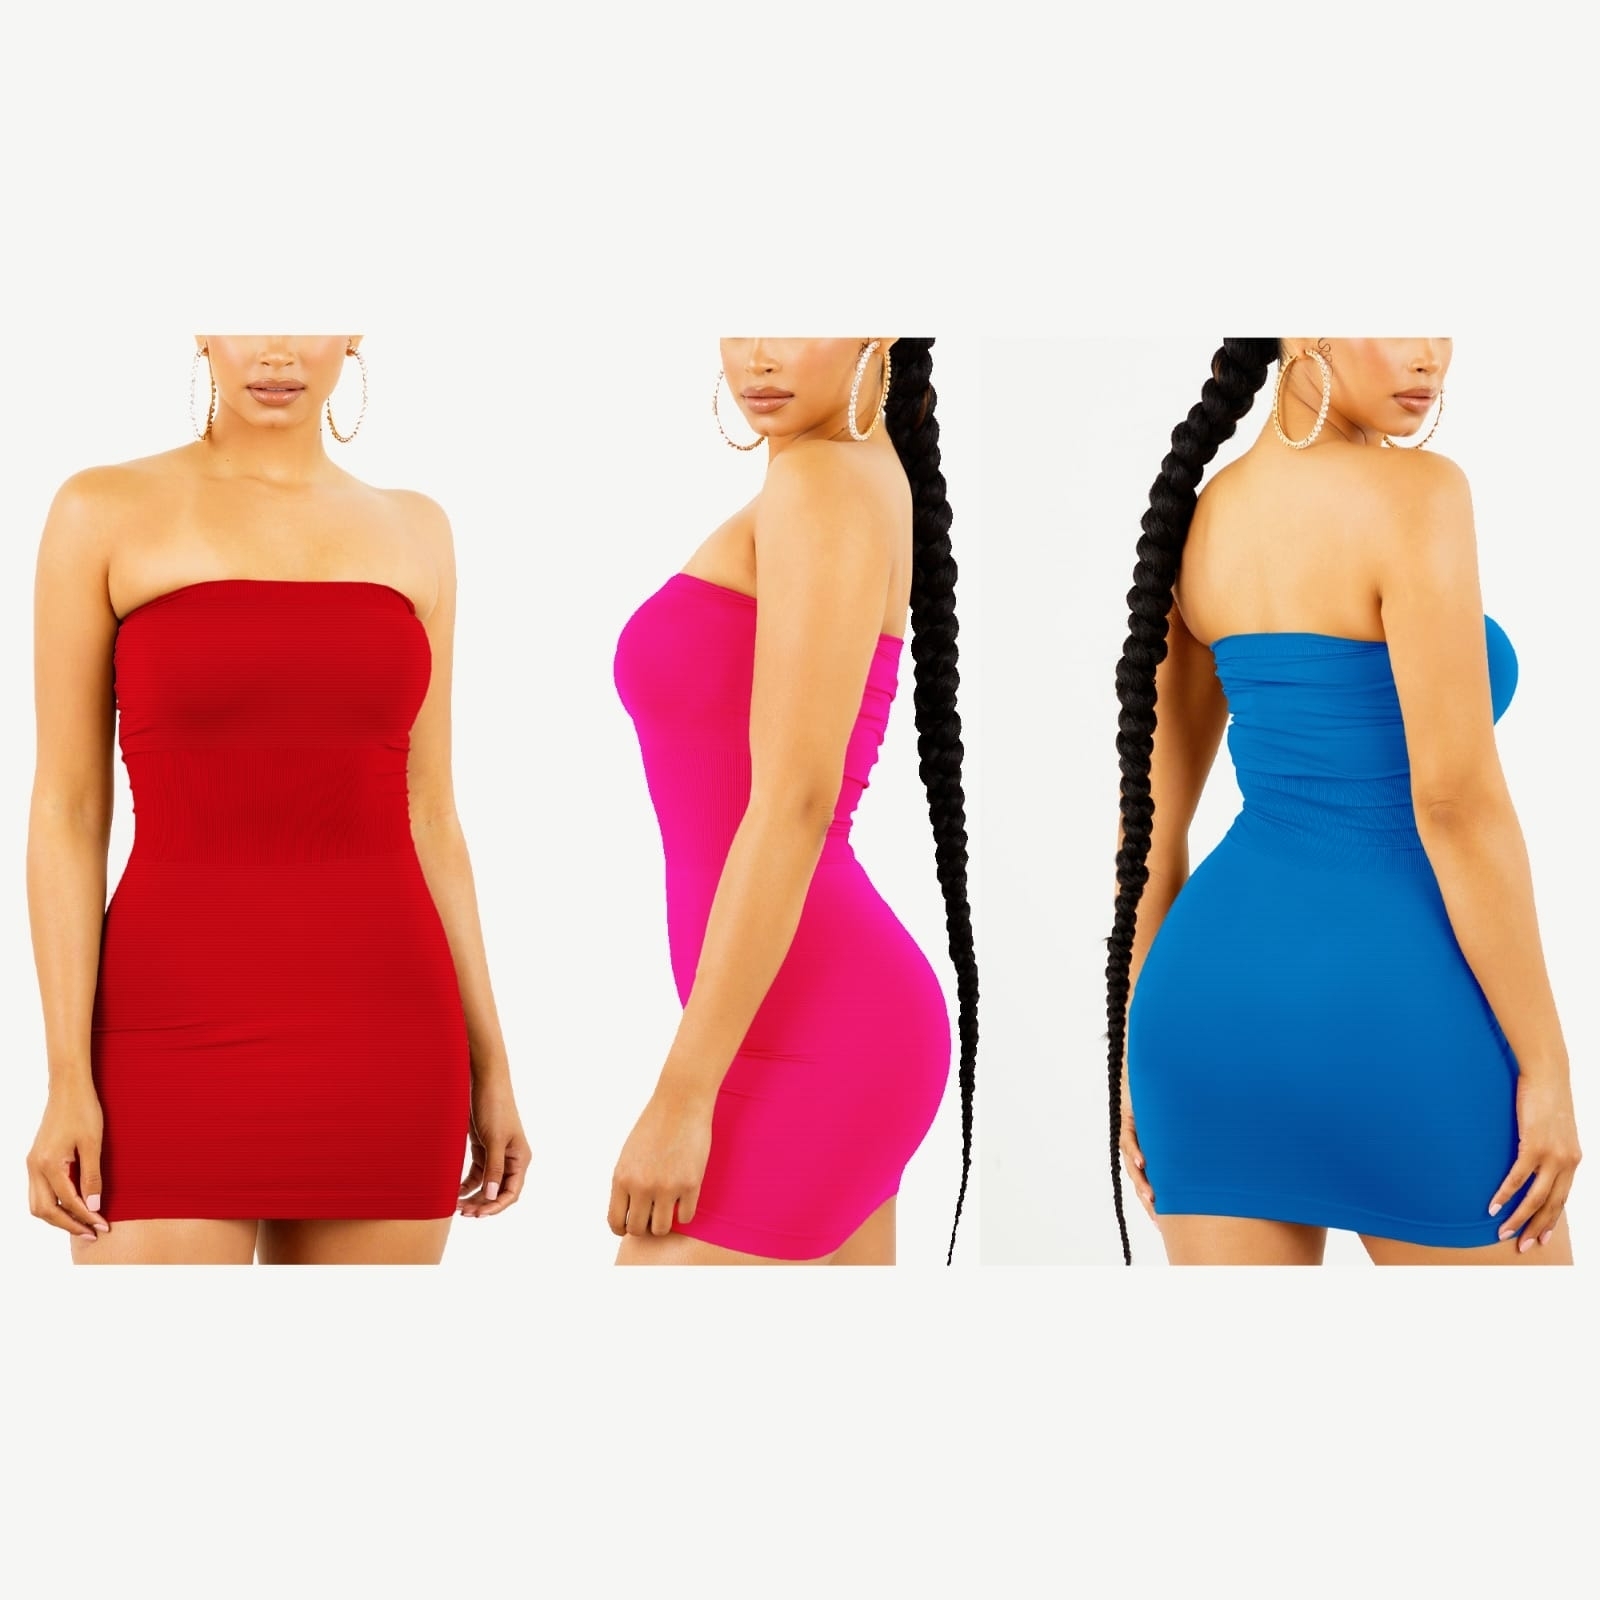 2-Pack Women's Strapless Stretchy Tight Fit Seamless Body Con Mini Tube Top Dress - RED, 1XL